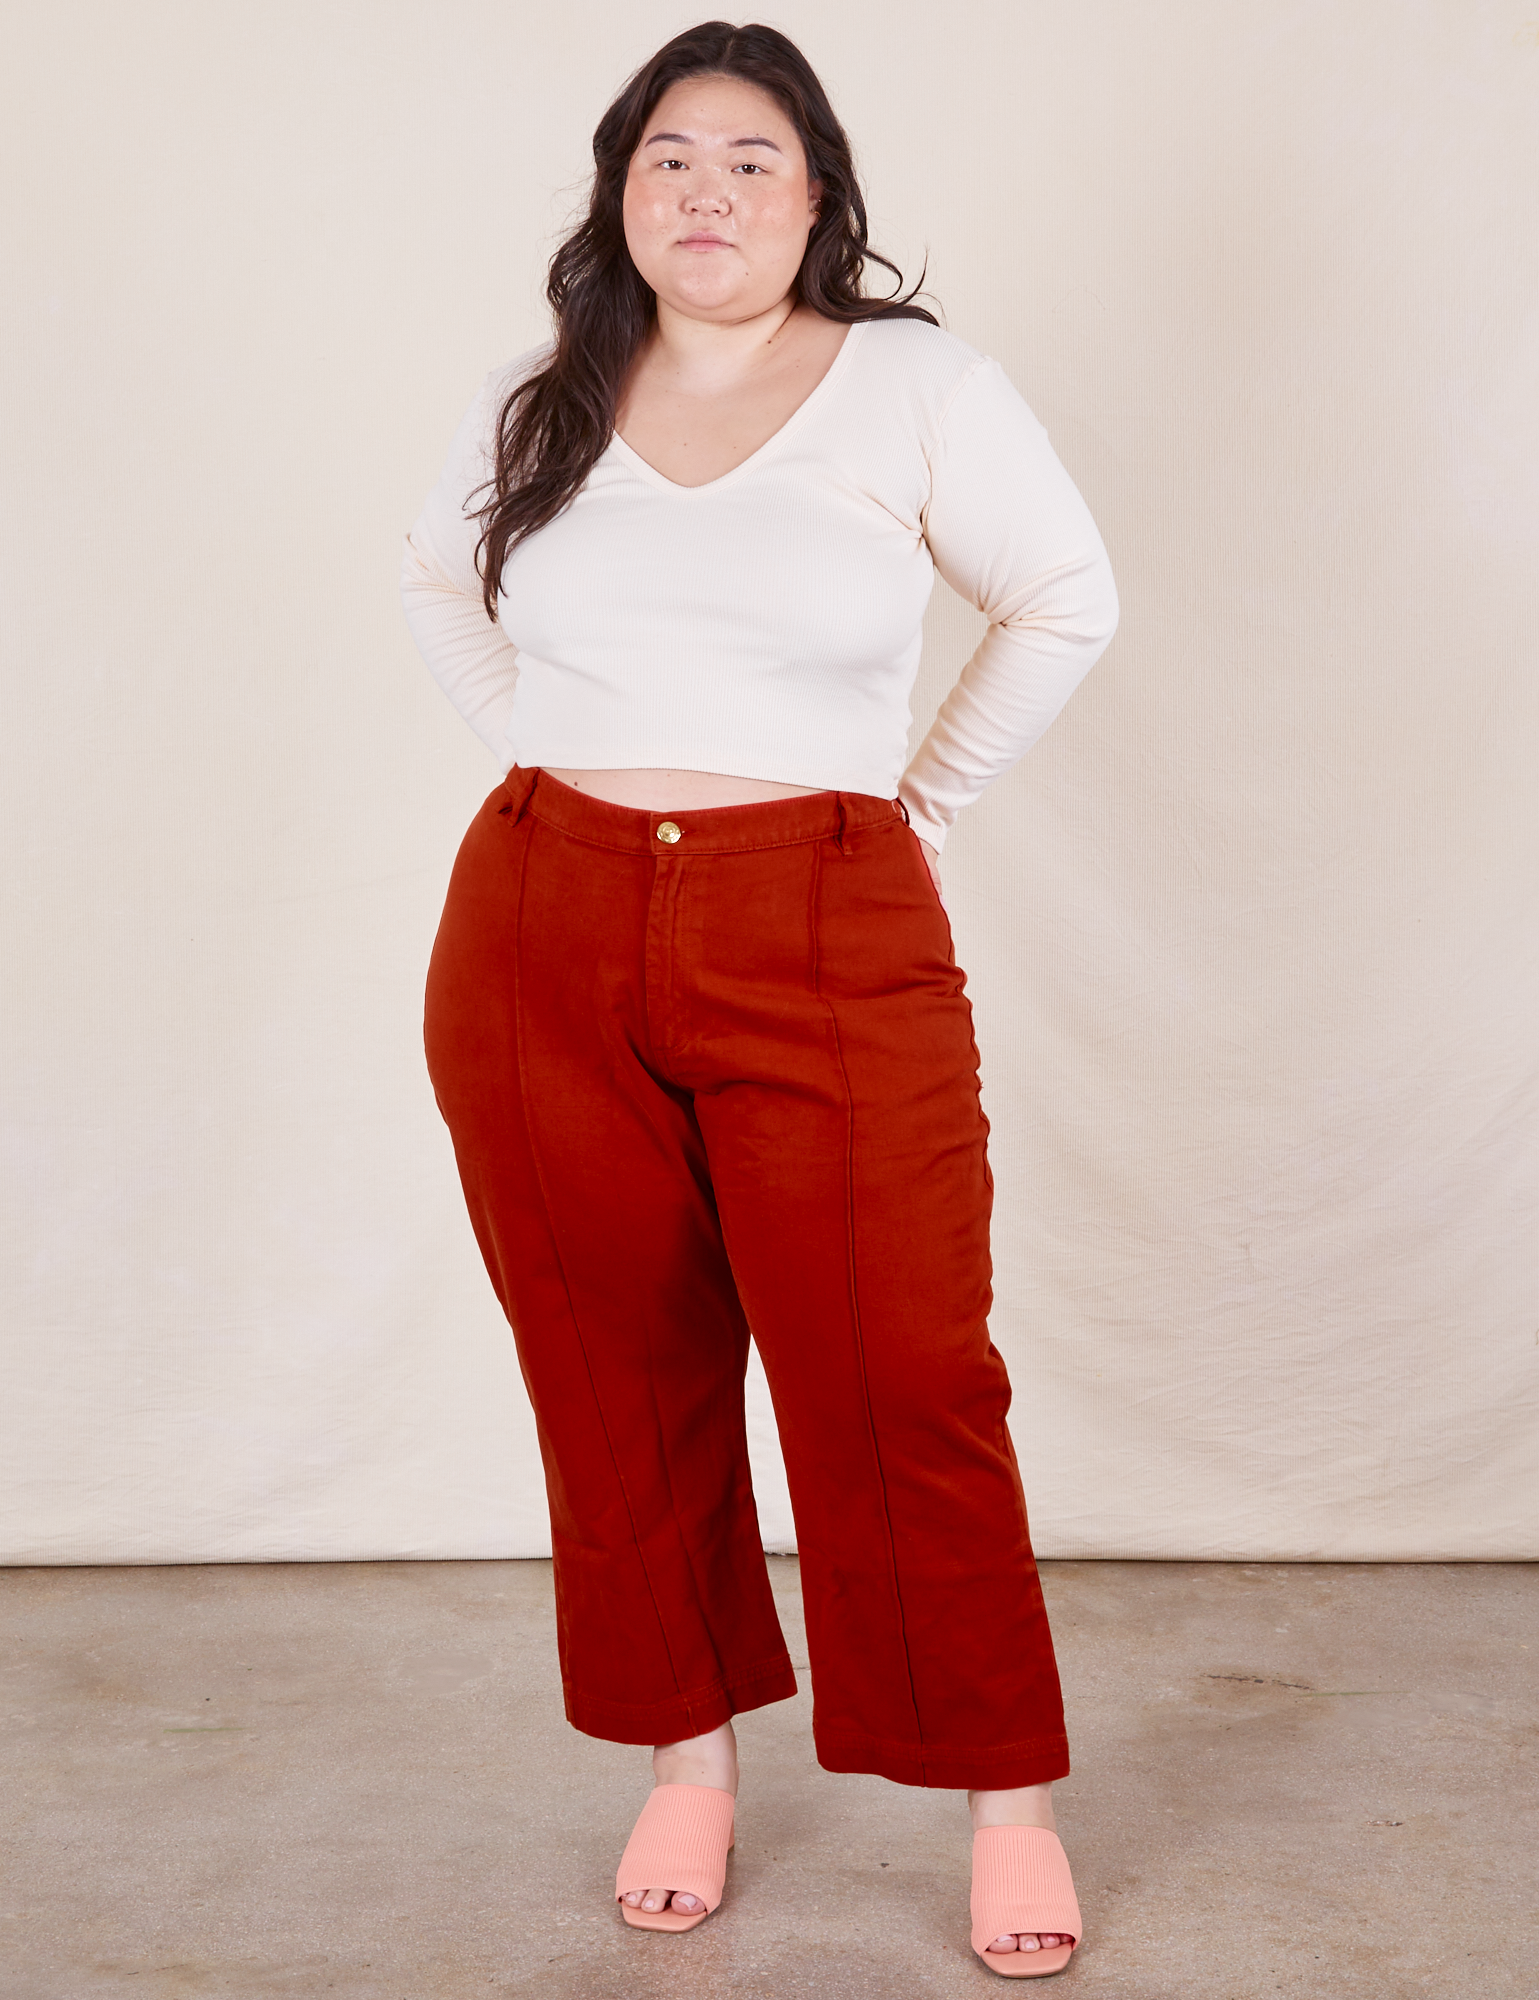 Ashley is 5&#39;7 and wearing 1XL Petite Western Pants in Paprika paired with a vintage off-white Long Sleeve V-Neck Tee